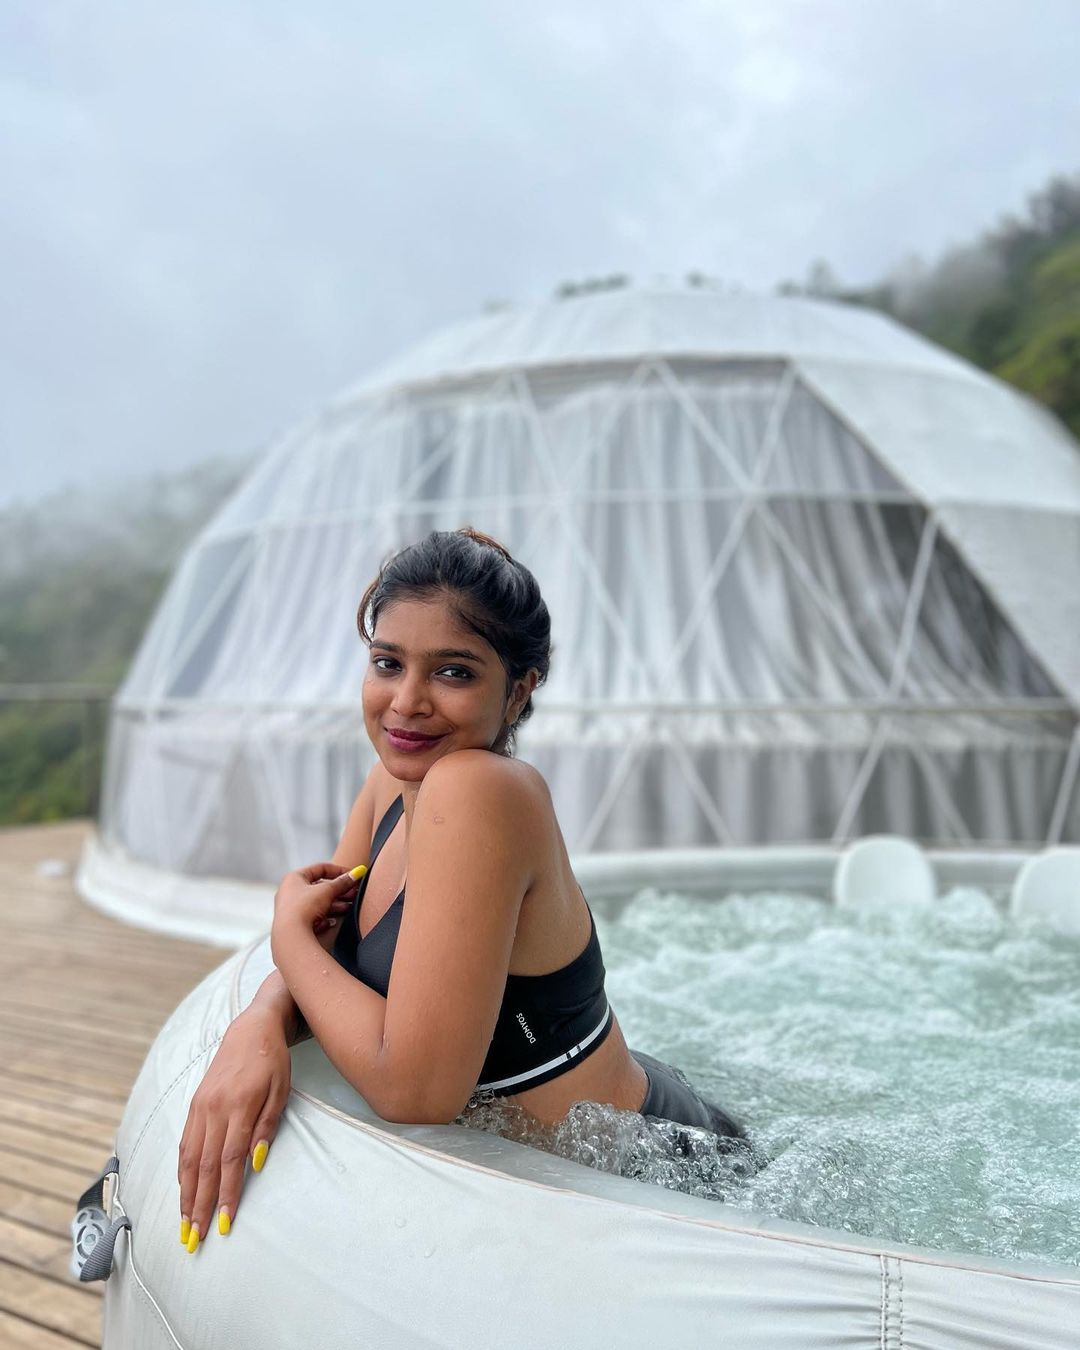 vj parvathy hot photos from tourist place